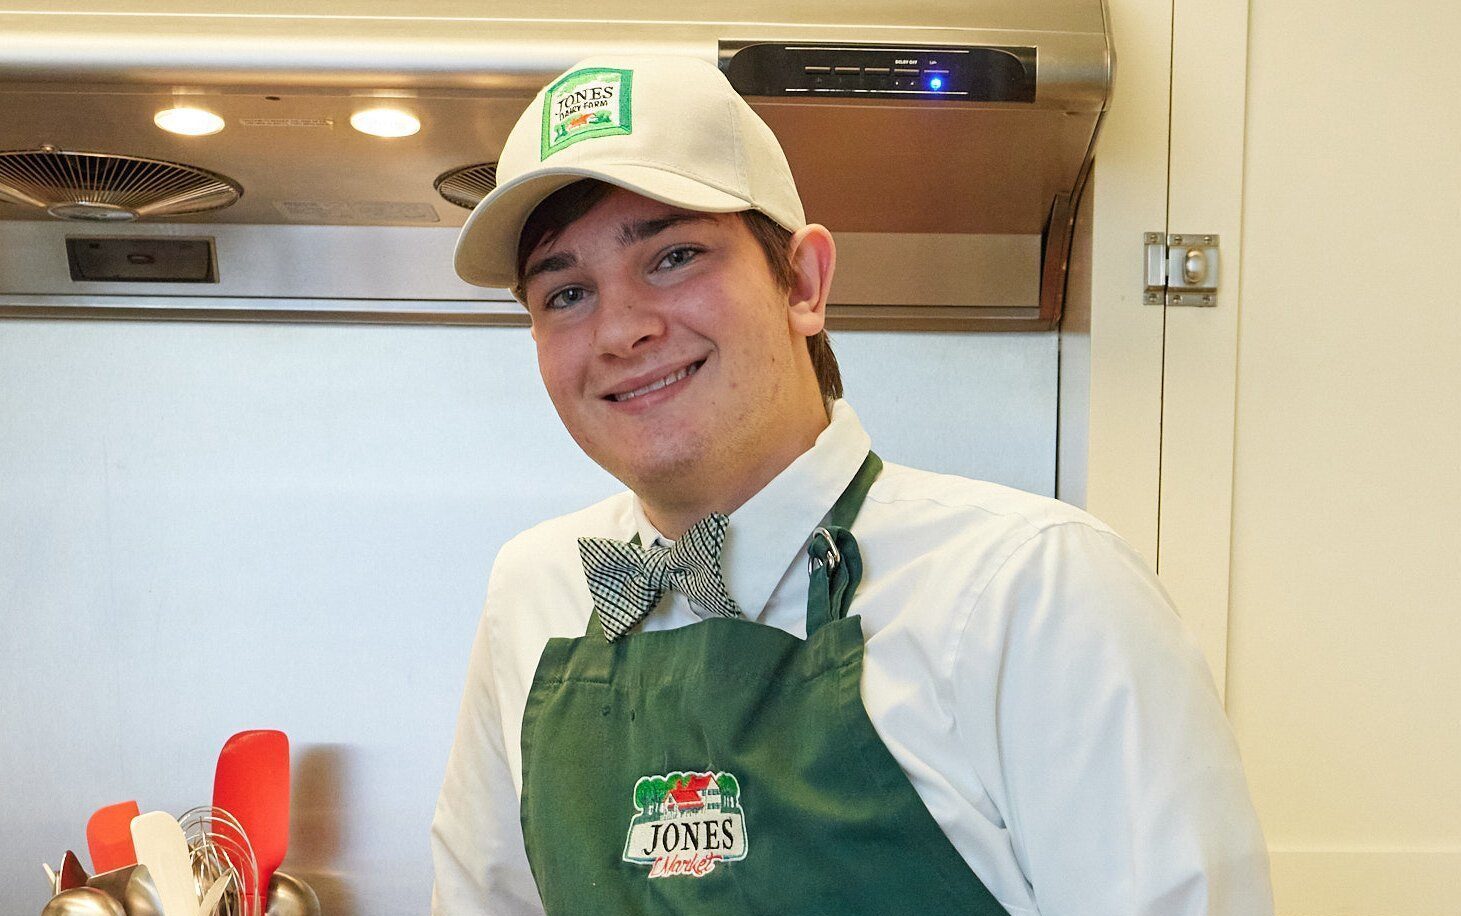 young Man with Jones apron